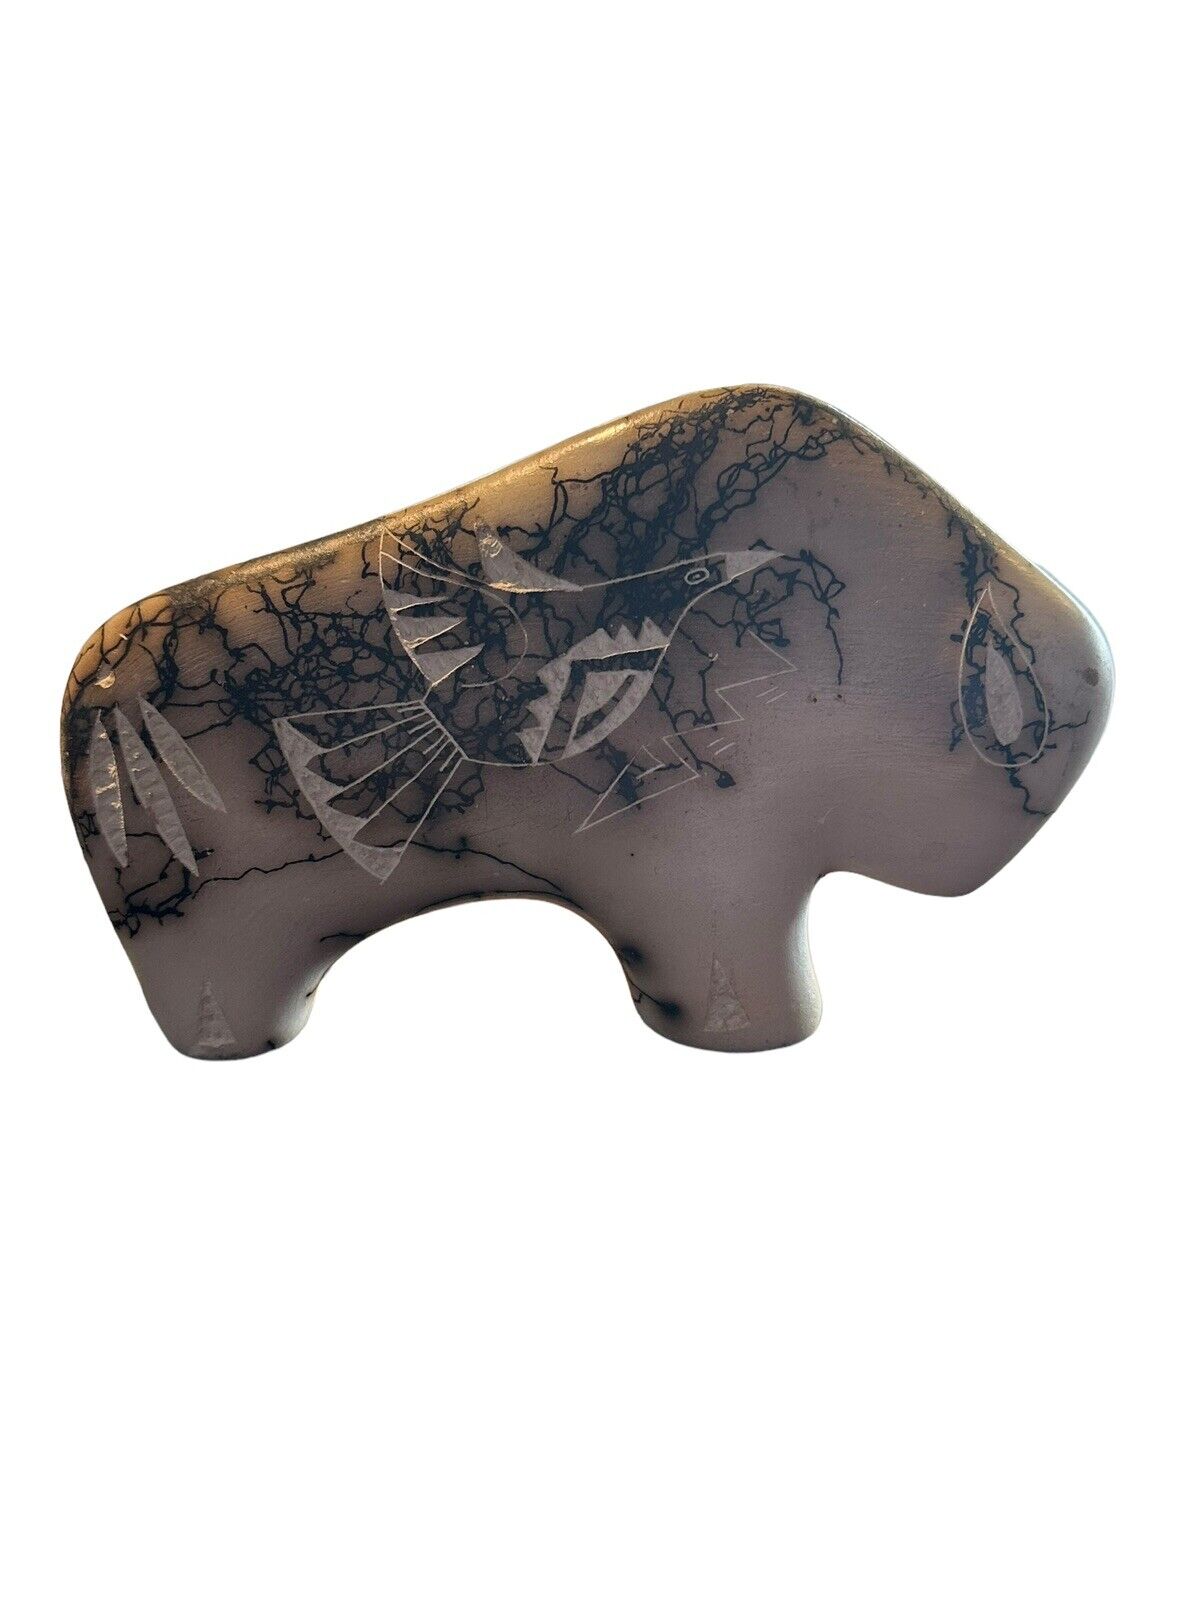 Tom Vail Navajo Horse Hair Ceramic Pottery Buffalo Bison Inscribed By Artist HTF